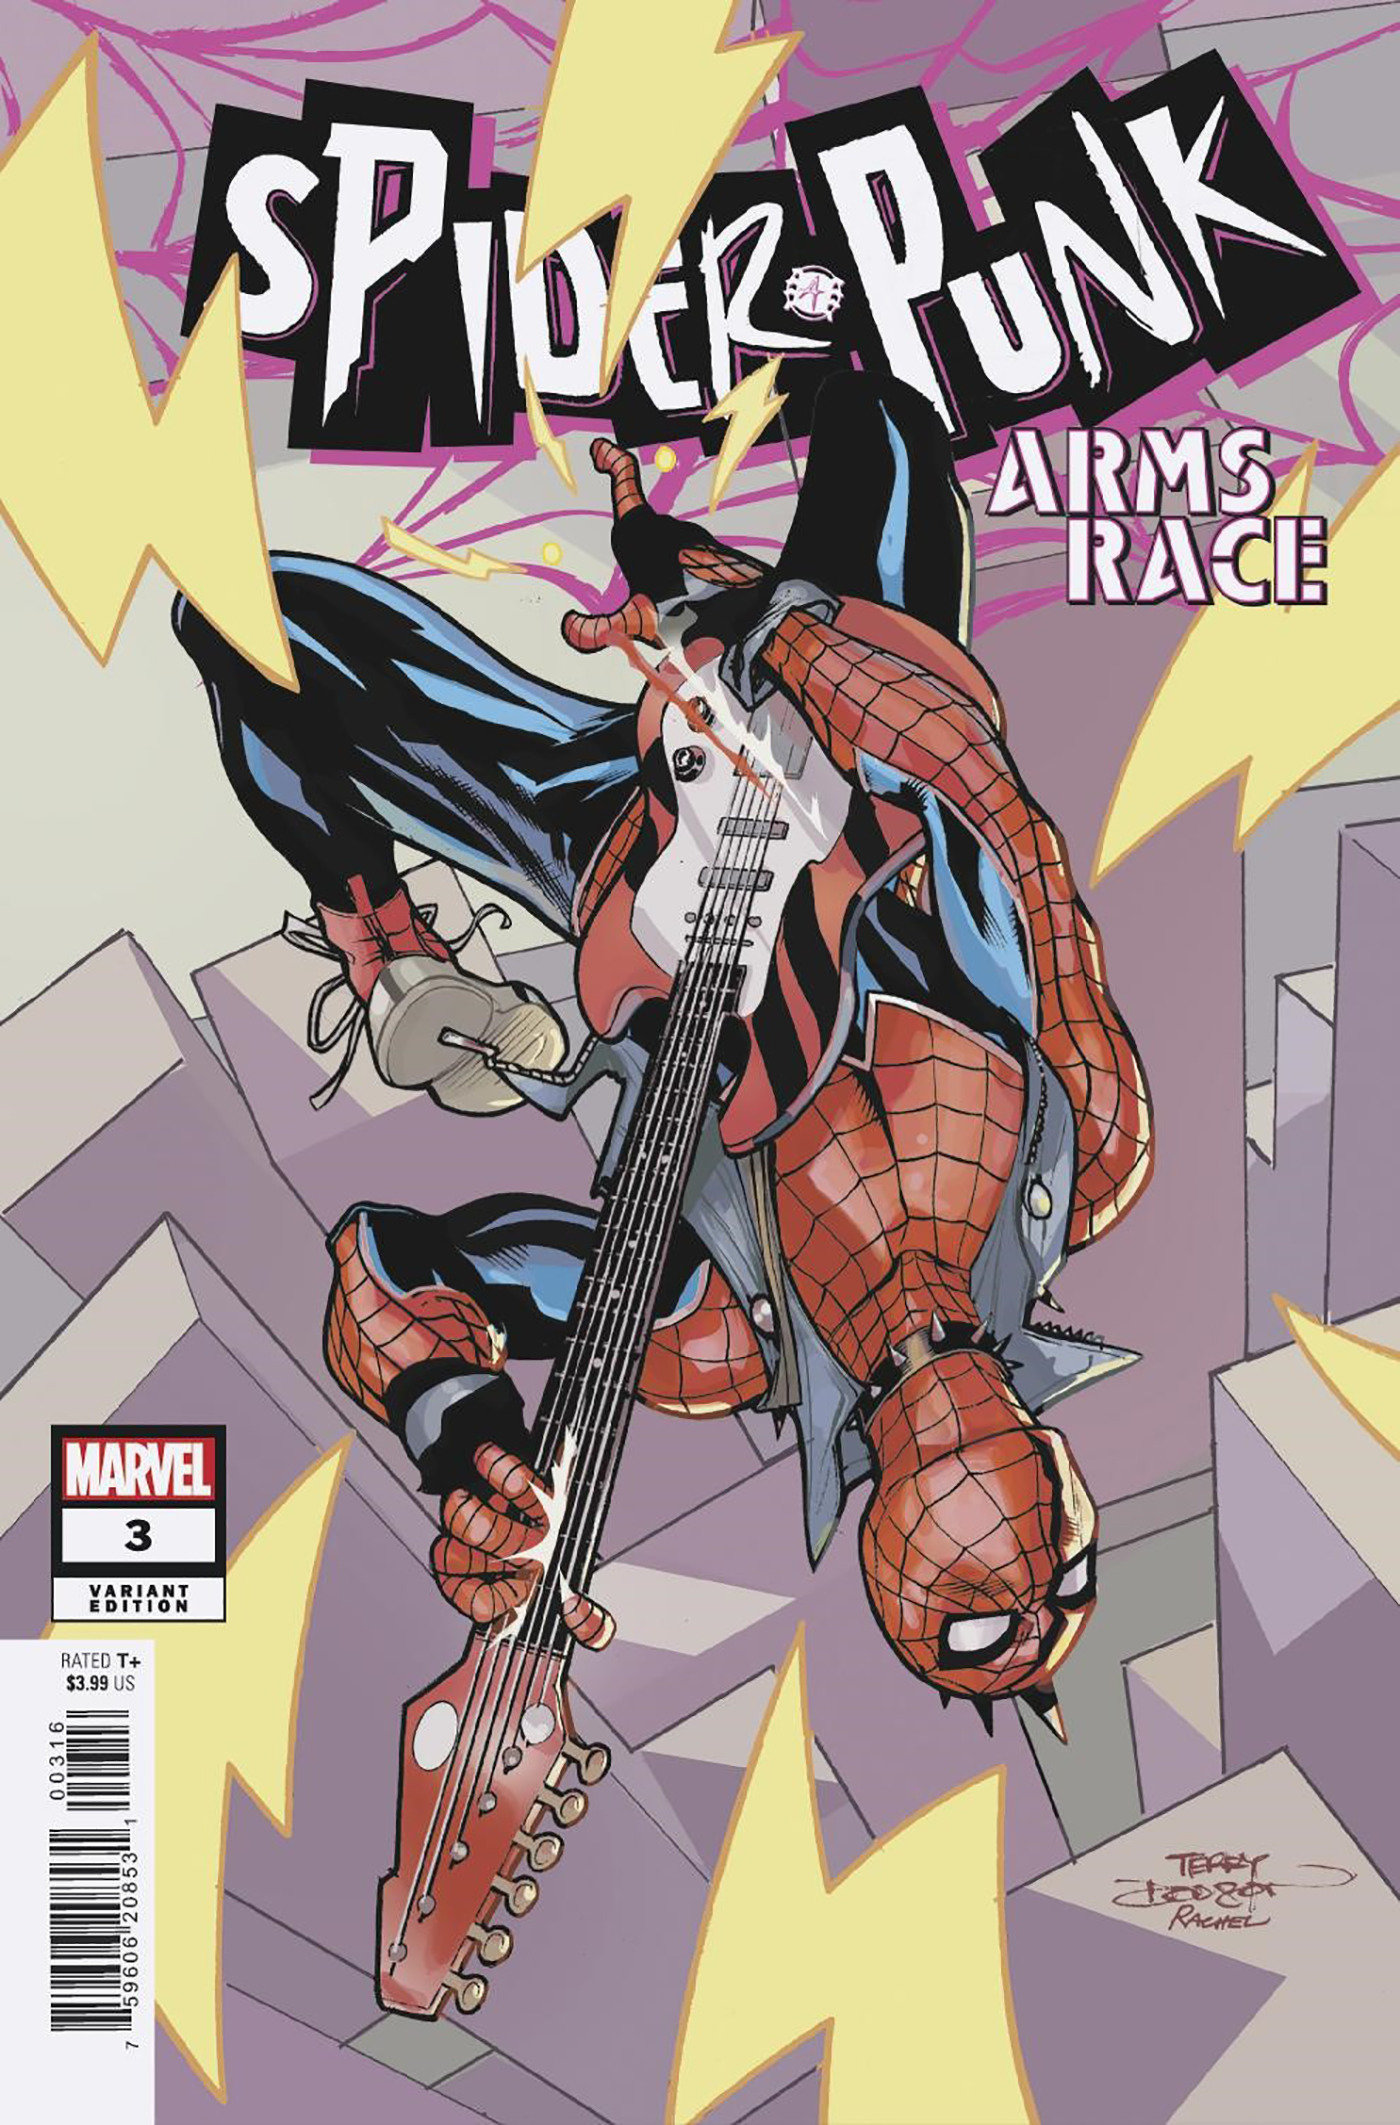 Spider-Punk Arms Race #3 Terry Dodson Variant 1 for 25 Incentive